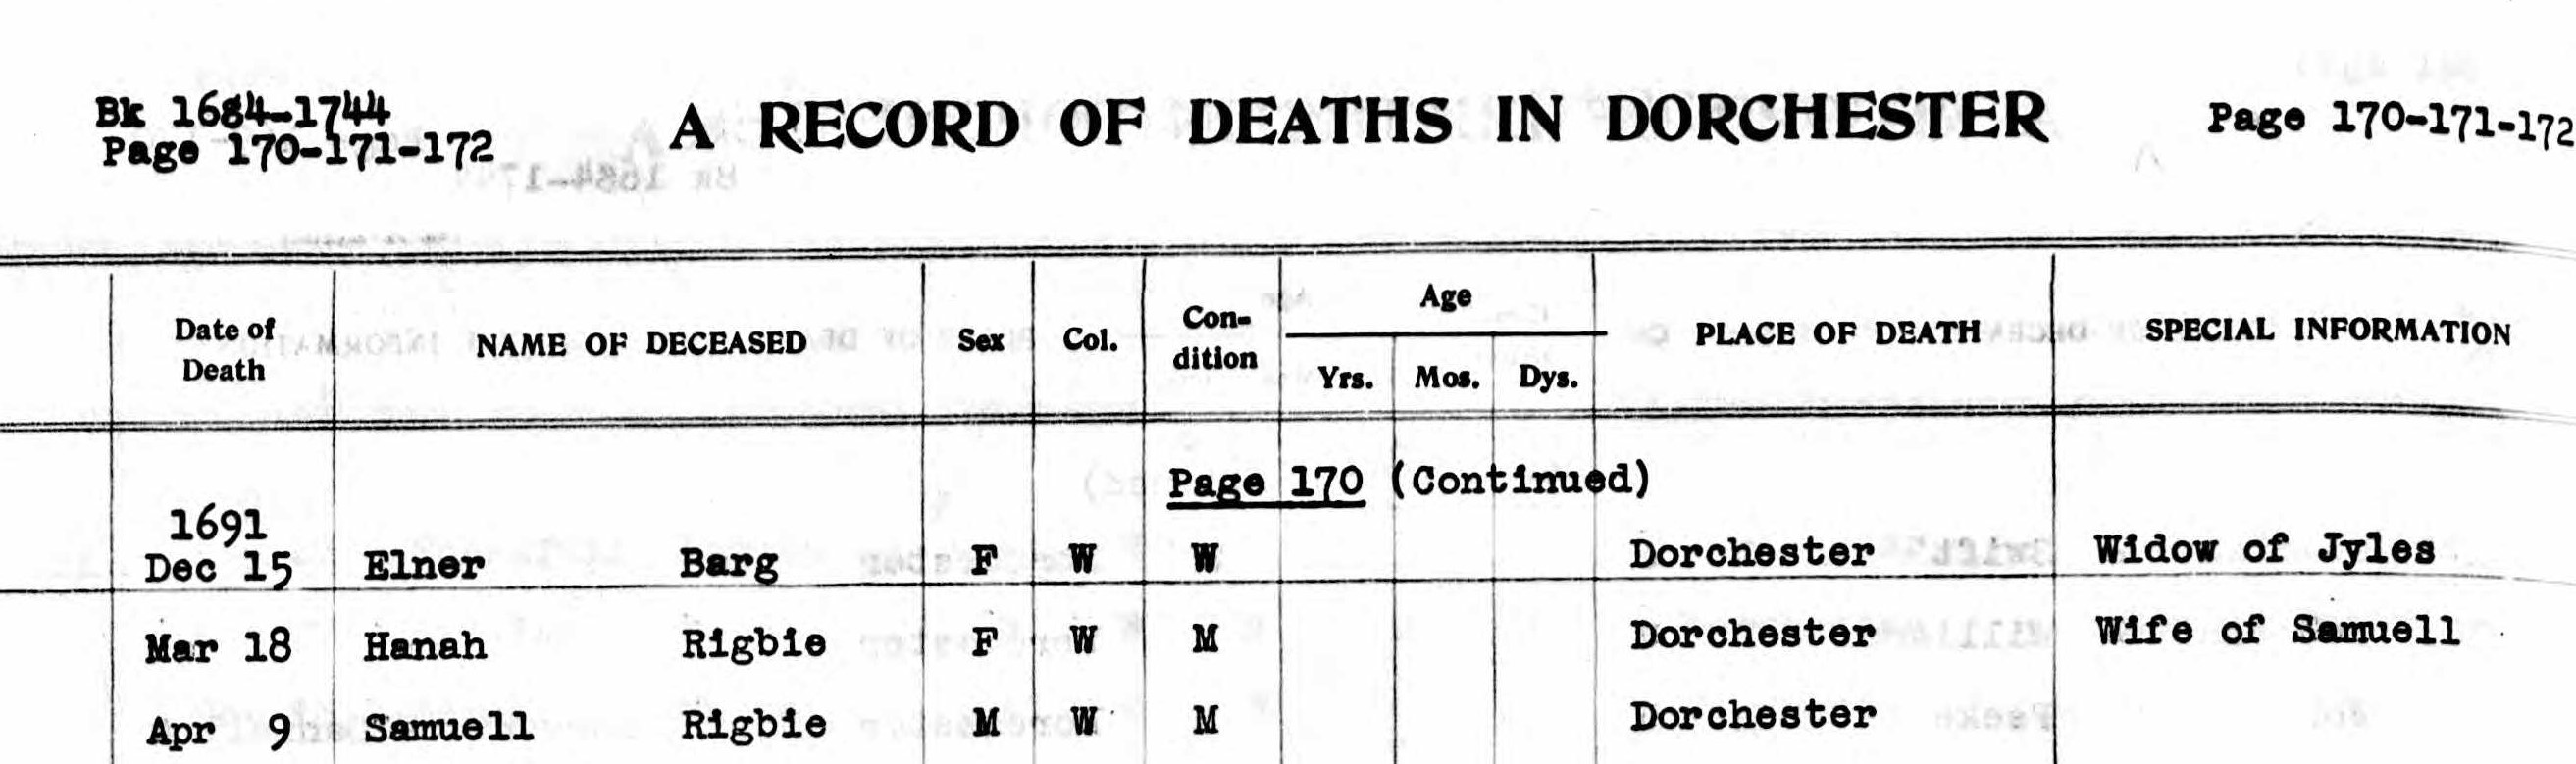 Death record of Samuel Rigby